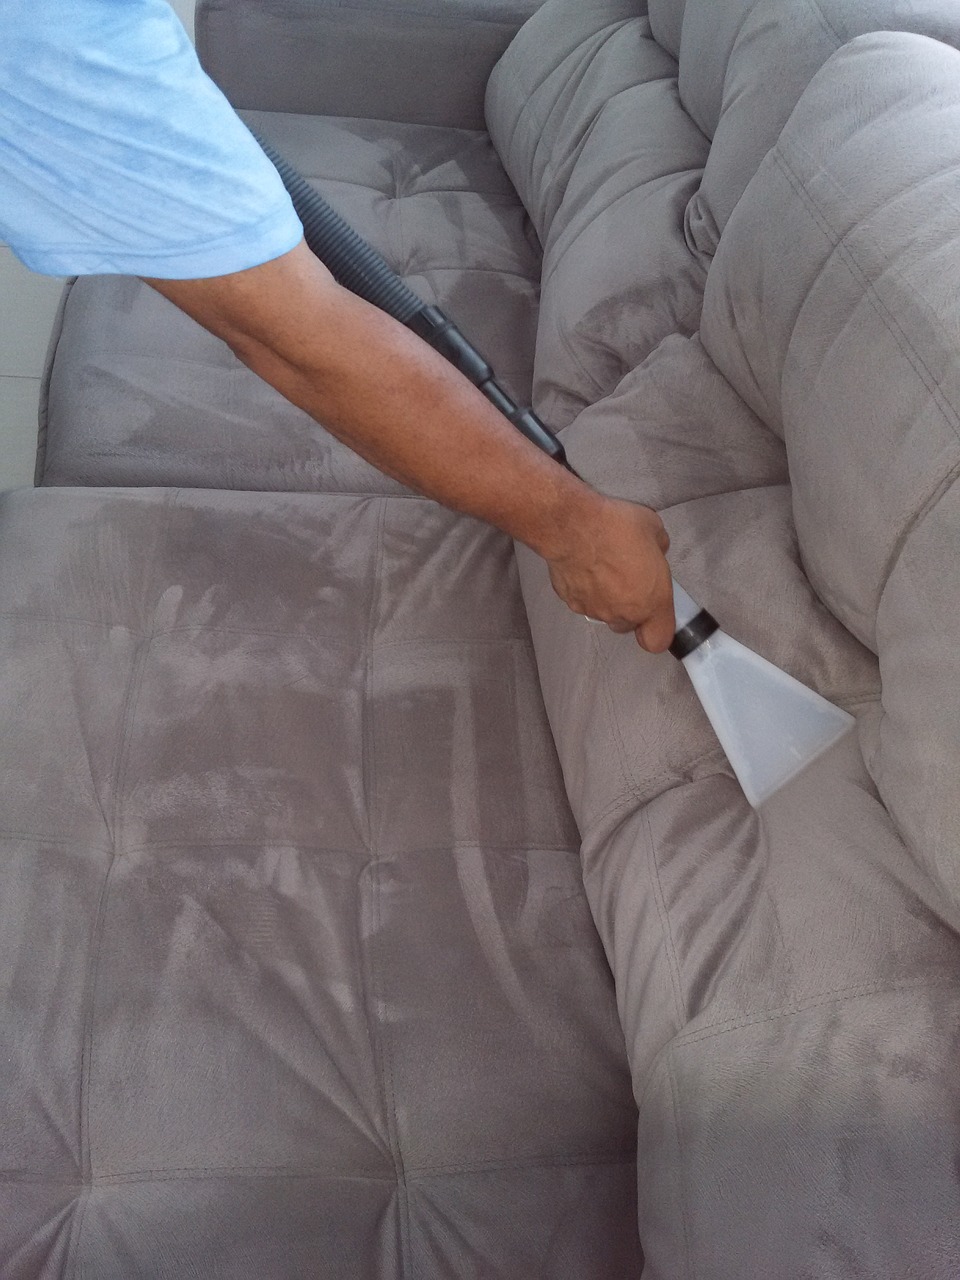 cleaning of sofa free photo